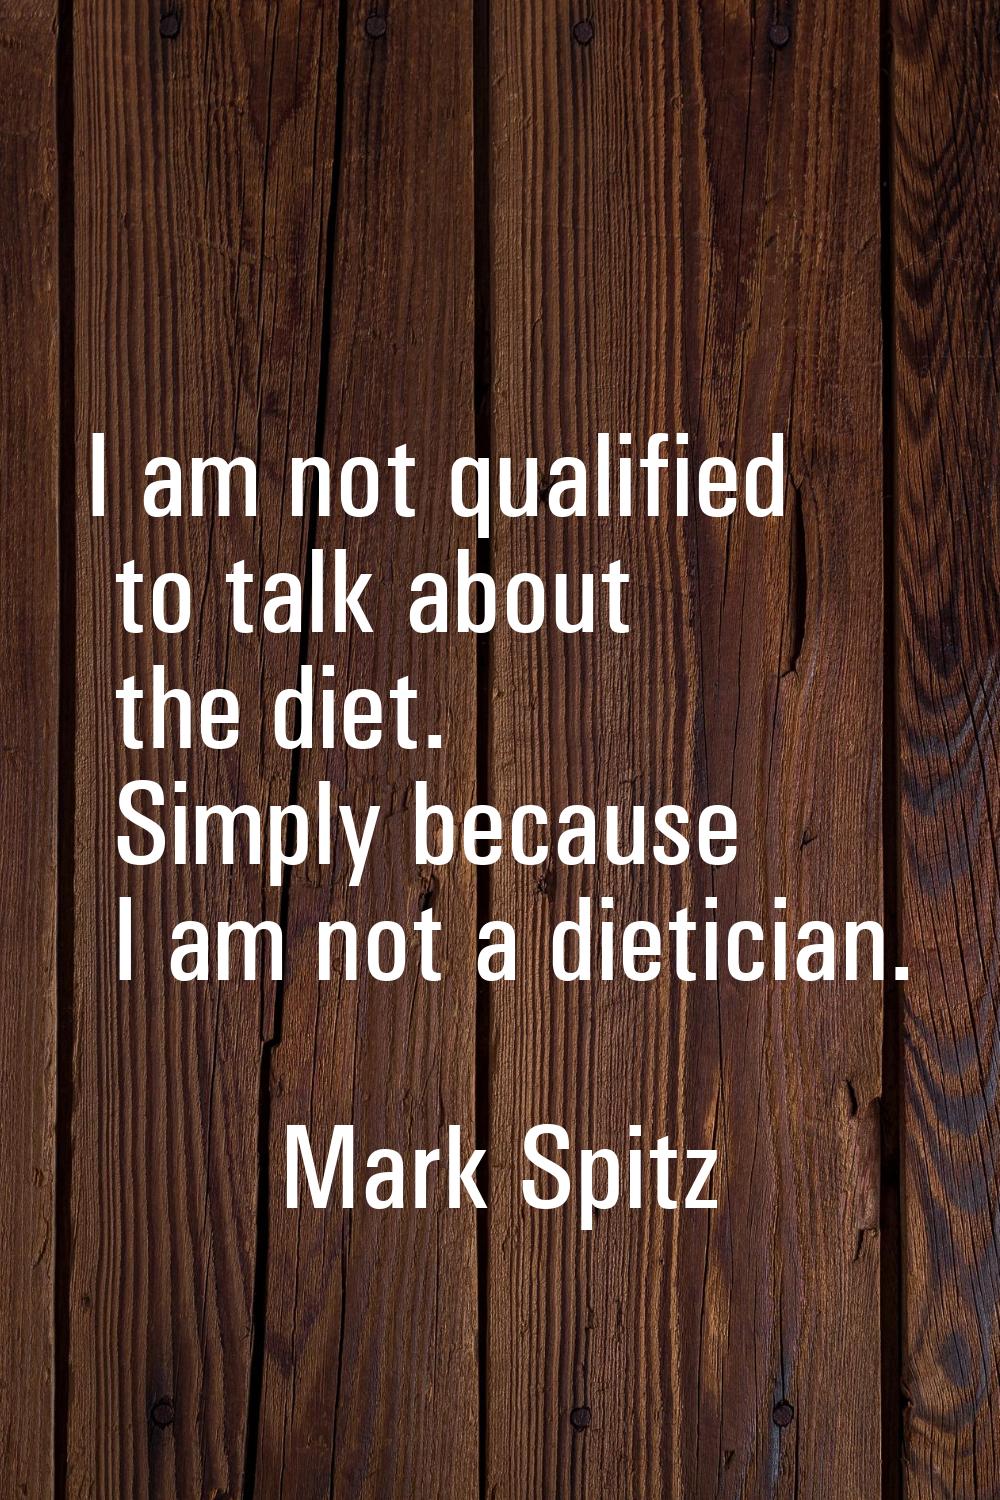 I am not qualified to talk about the diet. Simply because I am not a dietician.